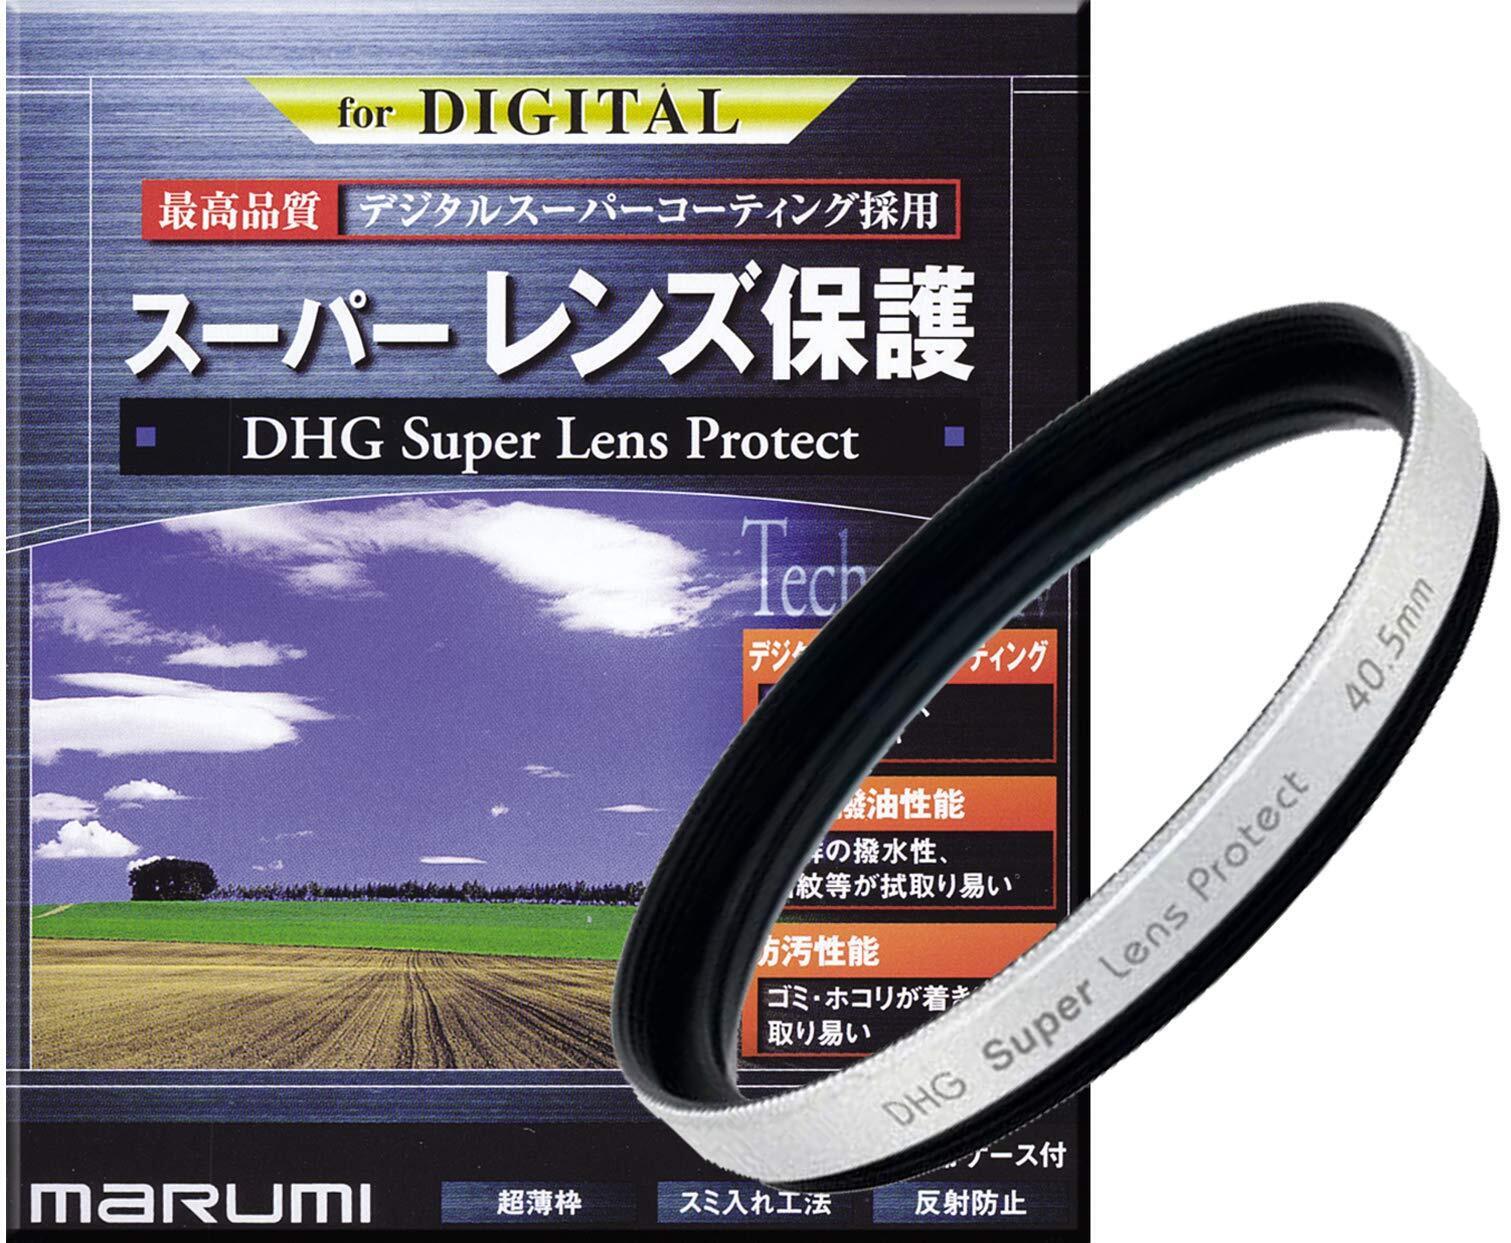 Marumi Lens Filter Dhg Super Lens Protect For Lens Protection 70430